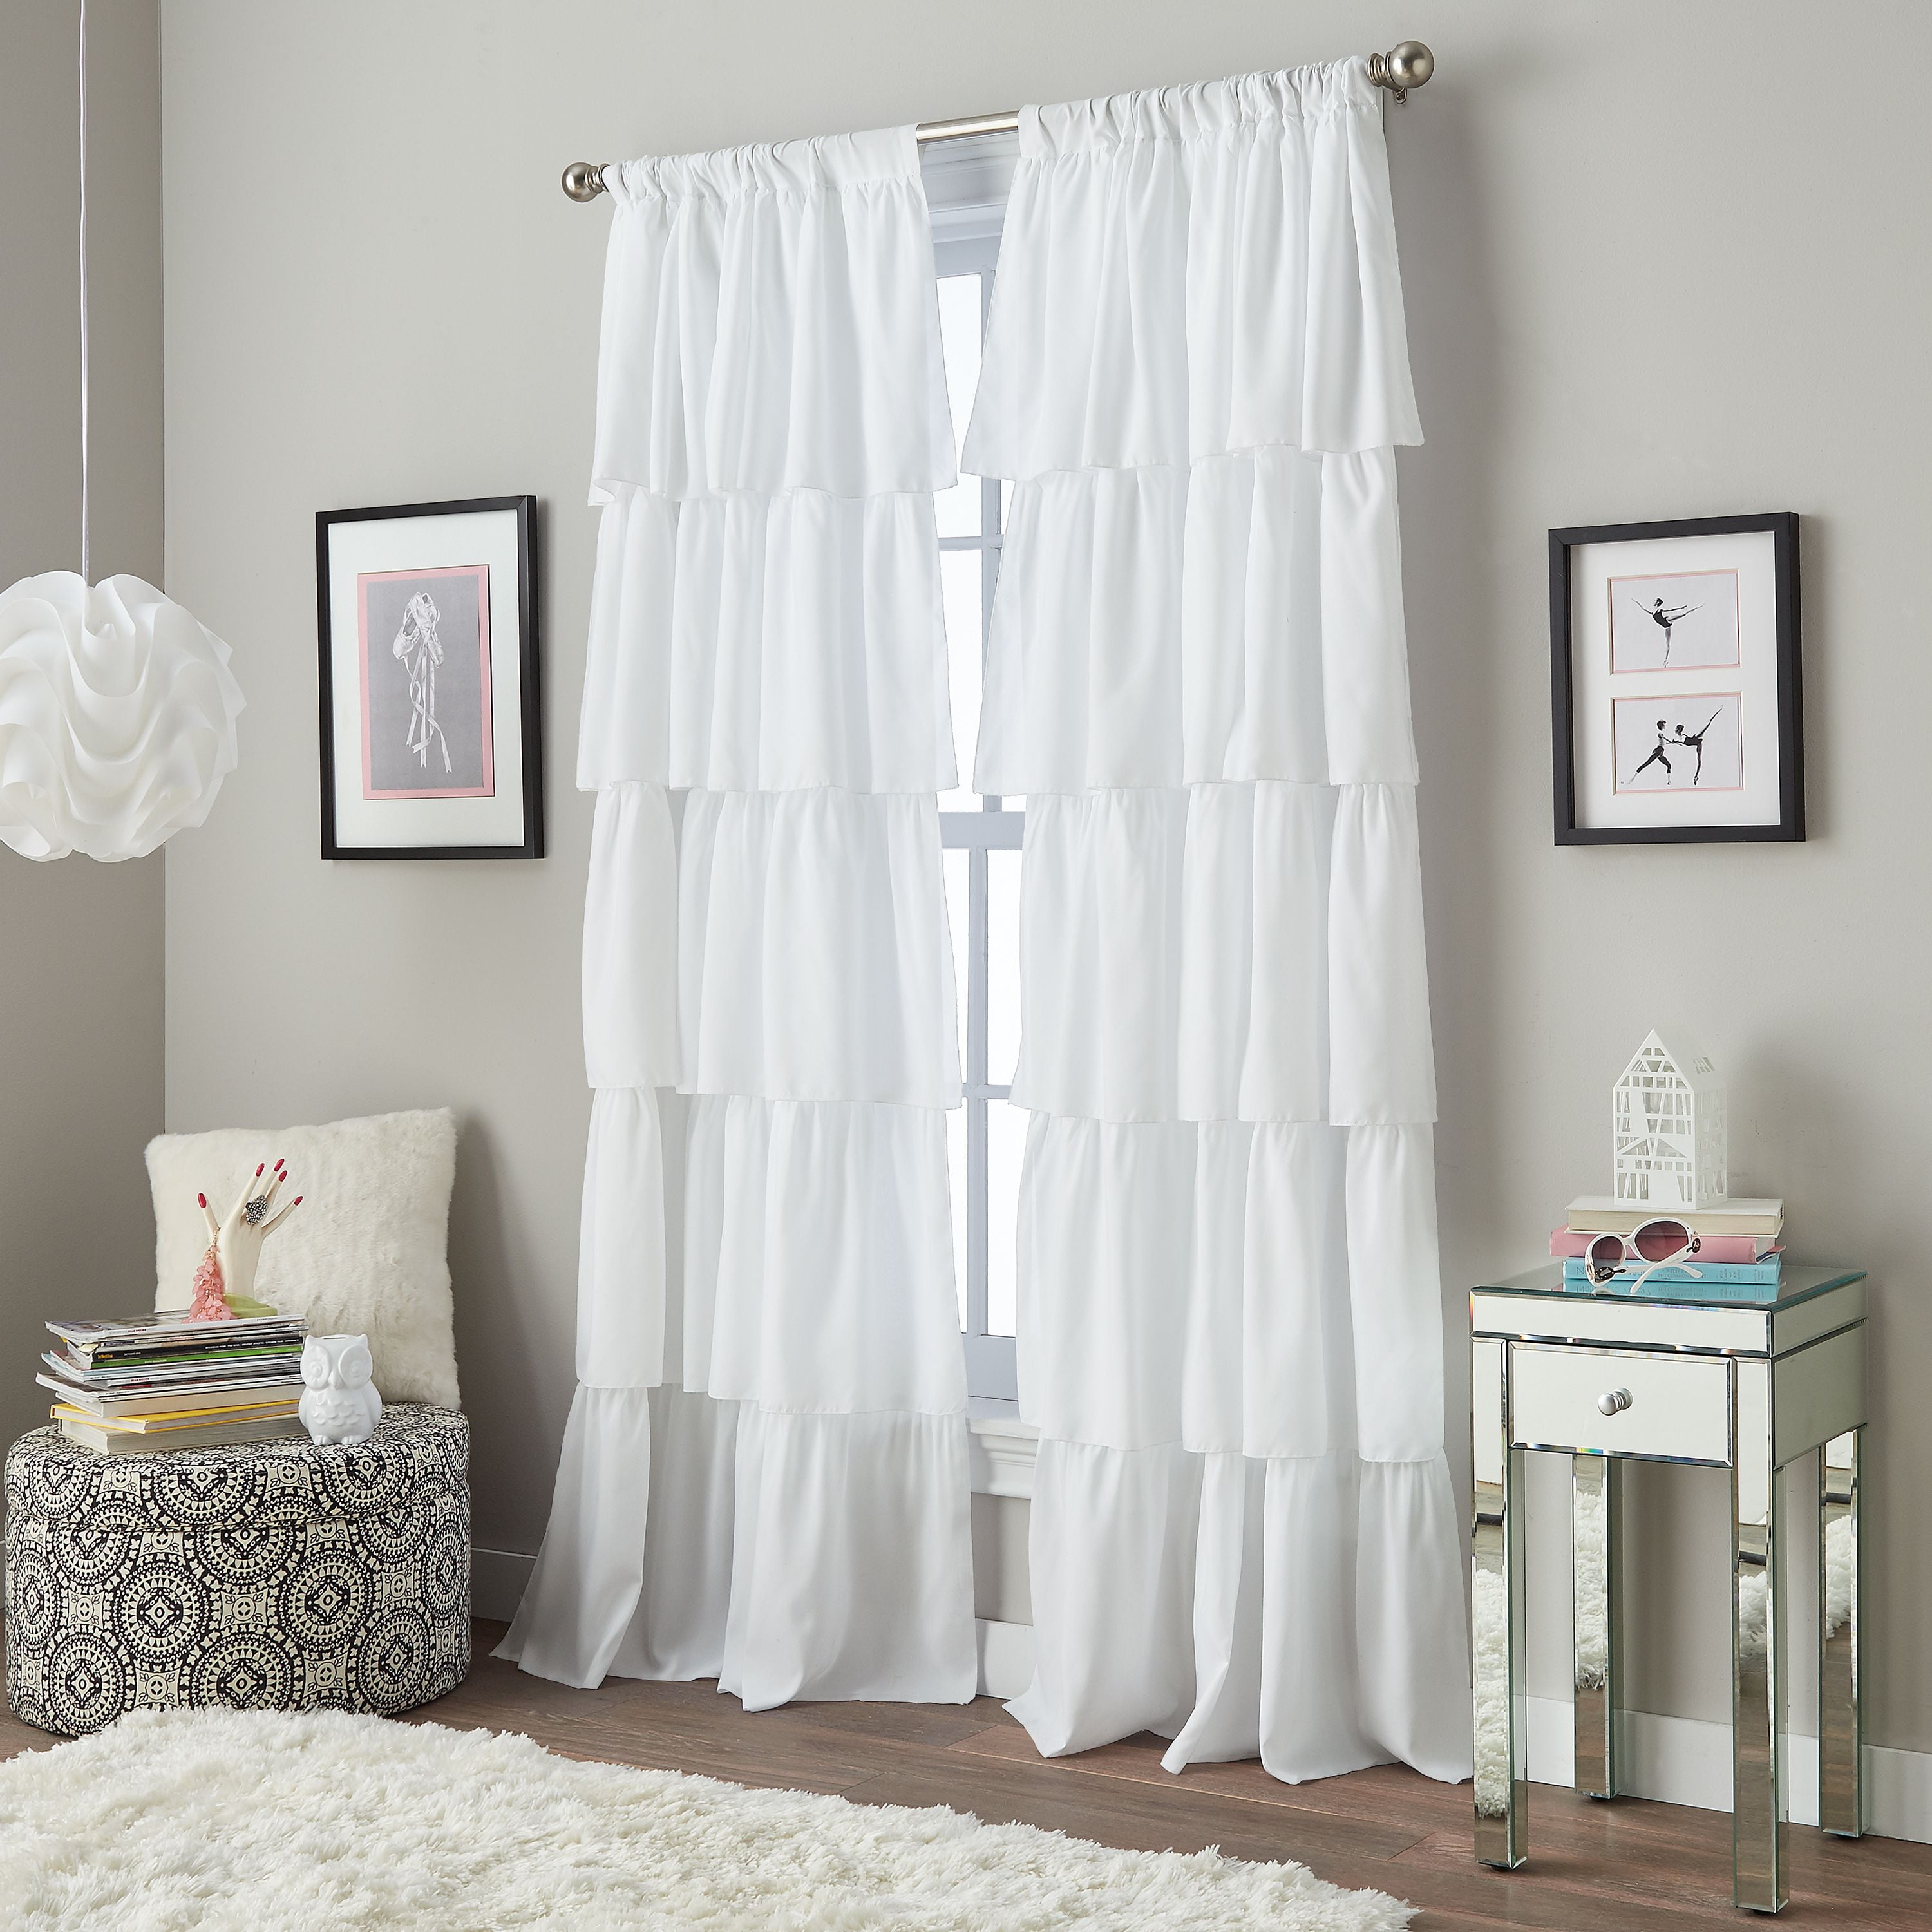 White 42" x 84" Your Zone Ruffle Girls Bedroom Two Curtain Panels 